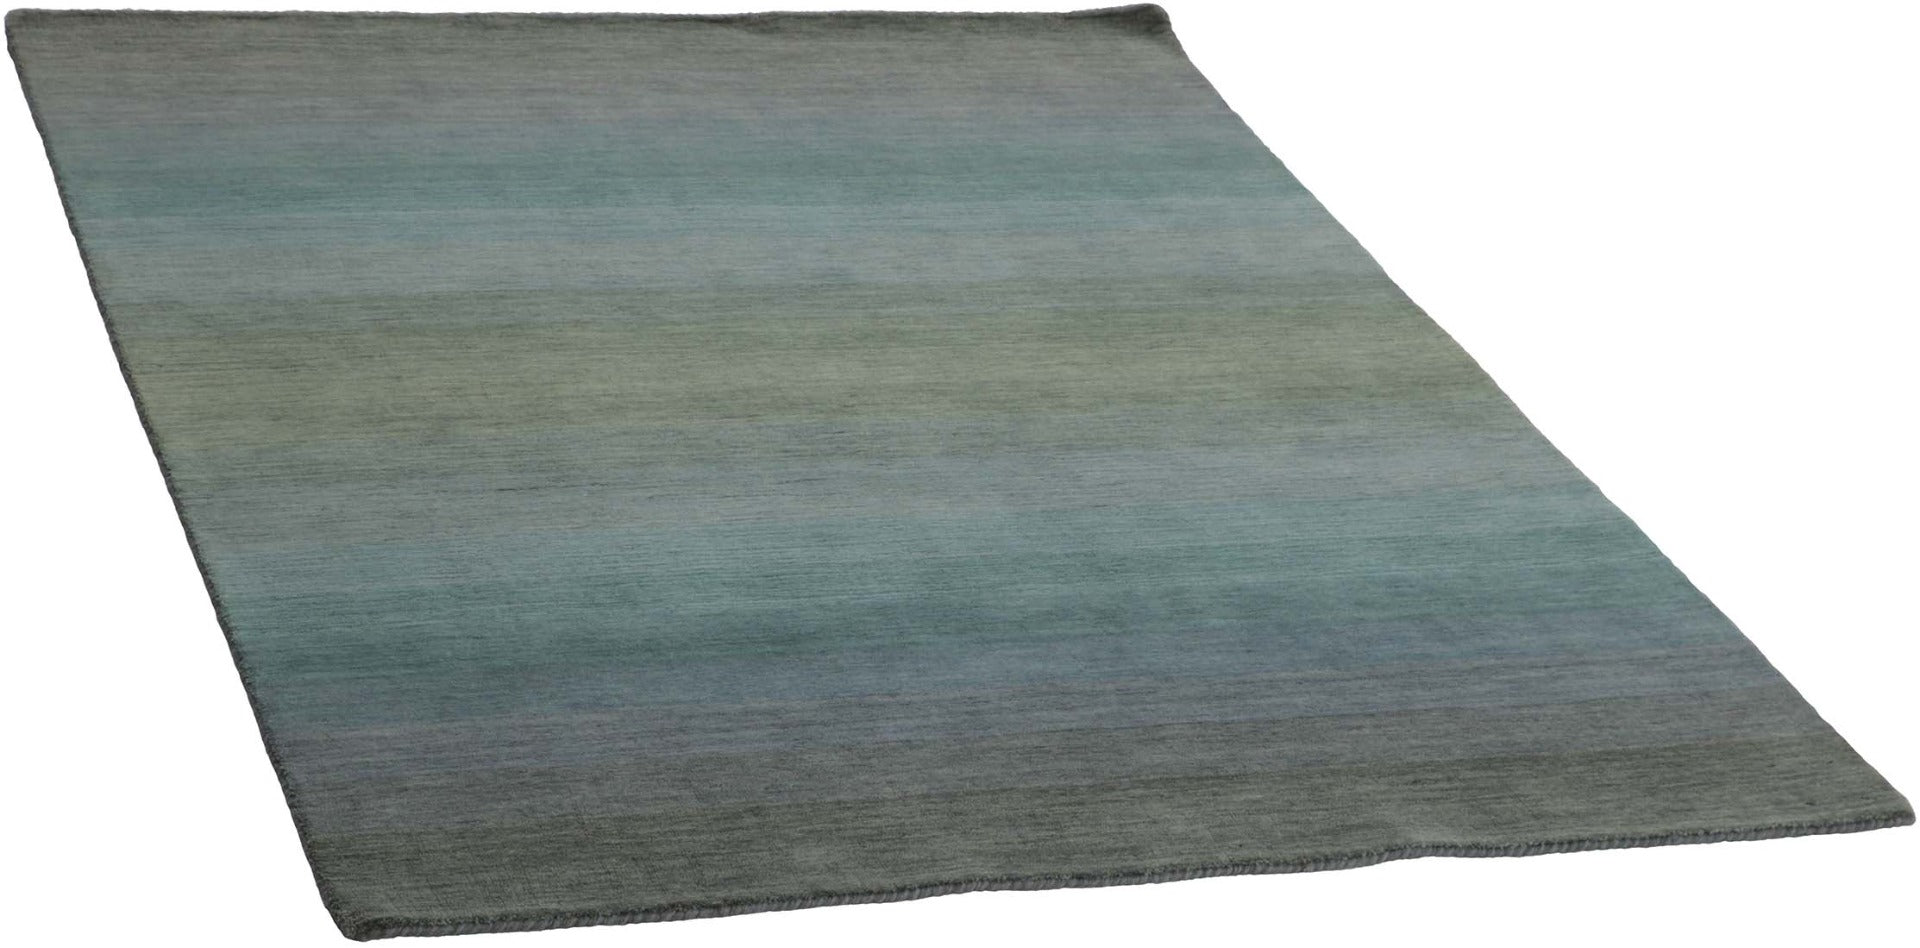  green and purple ombre rug
